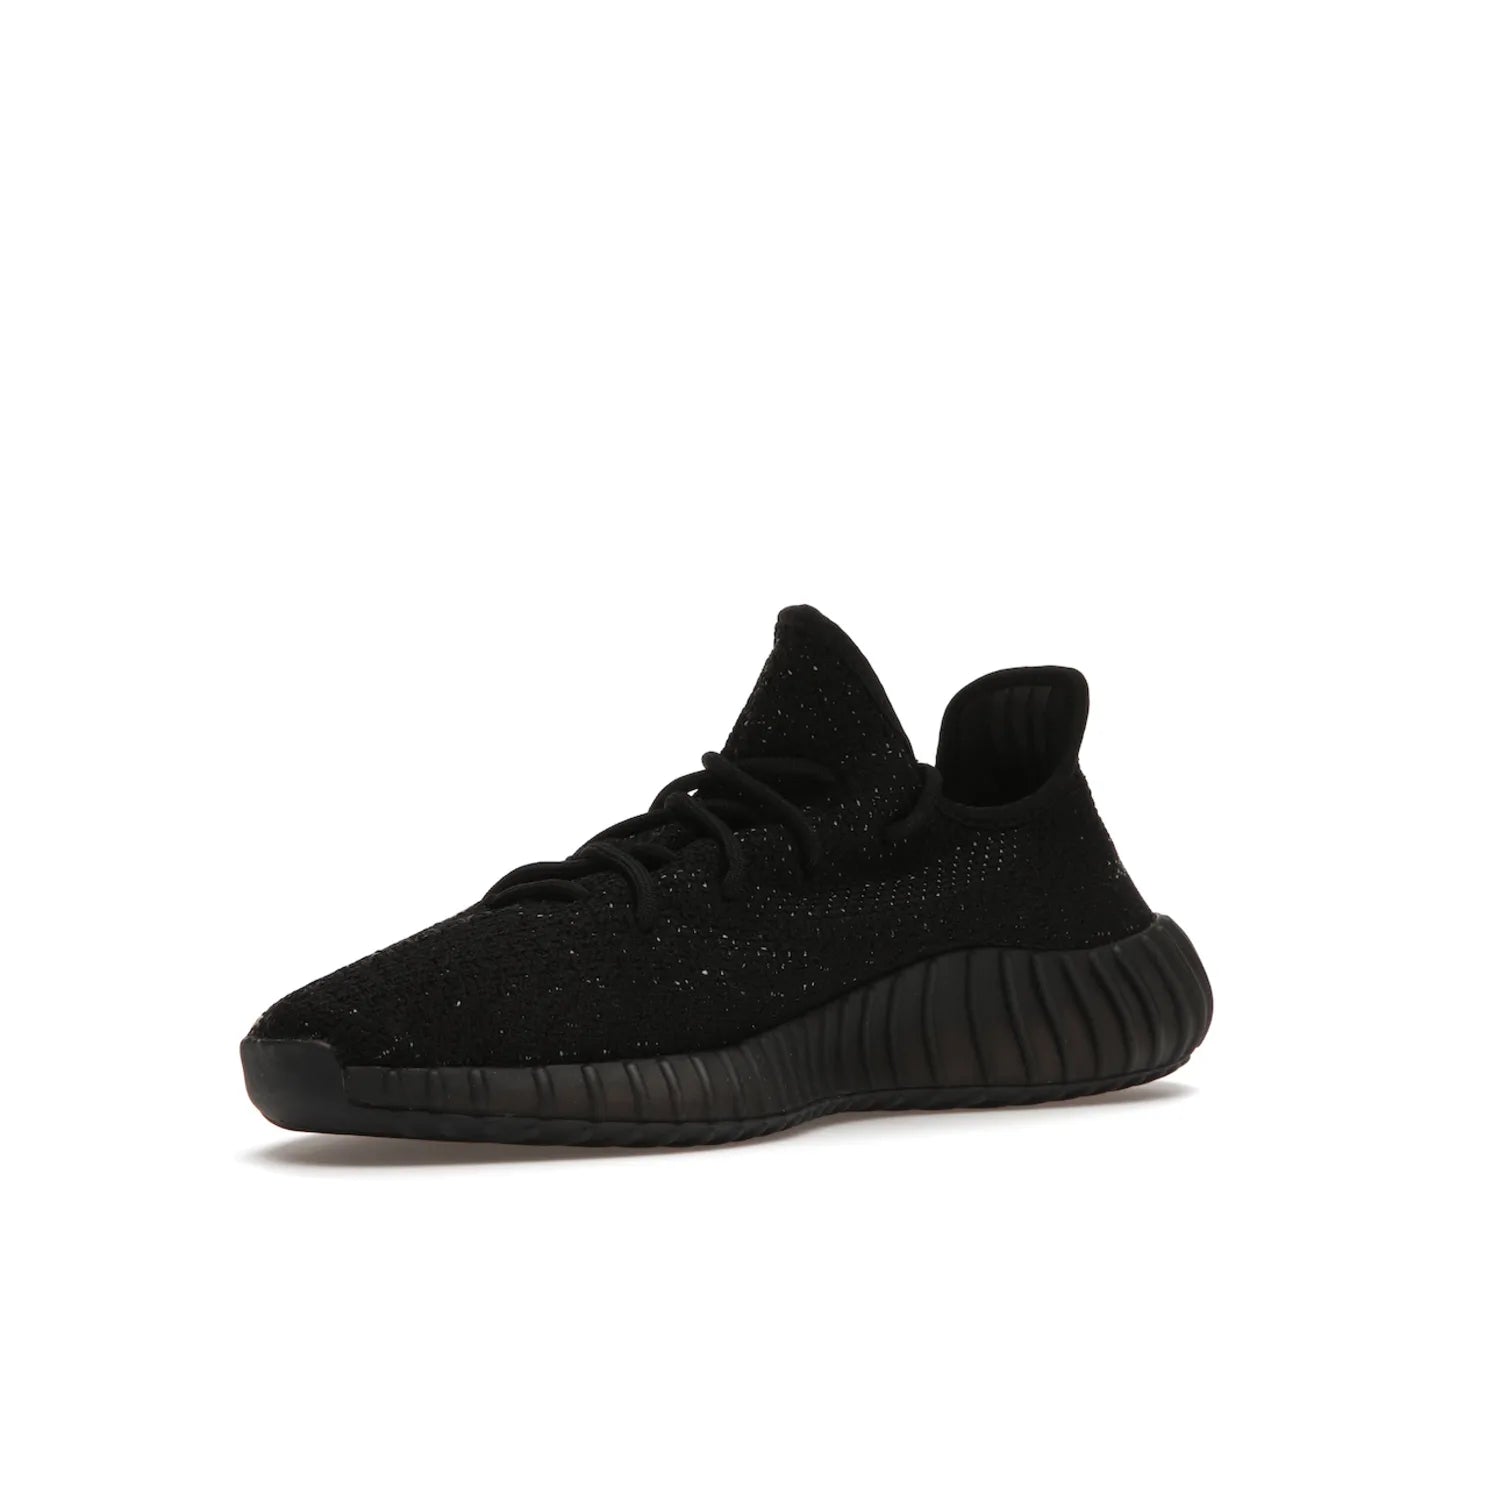 adidas Yeezy Boost 350 V2 Core Black White (2016/2022) - Image 15 - Only at www.BallersClubKickz.com - Stylish adidas Yeezy Boost 350 V2 in classic black with white "SPLY-350" stitched to the side stripe. Features Primeknit upper & Boost sole for comfort. Restock in March 2022.